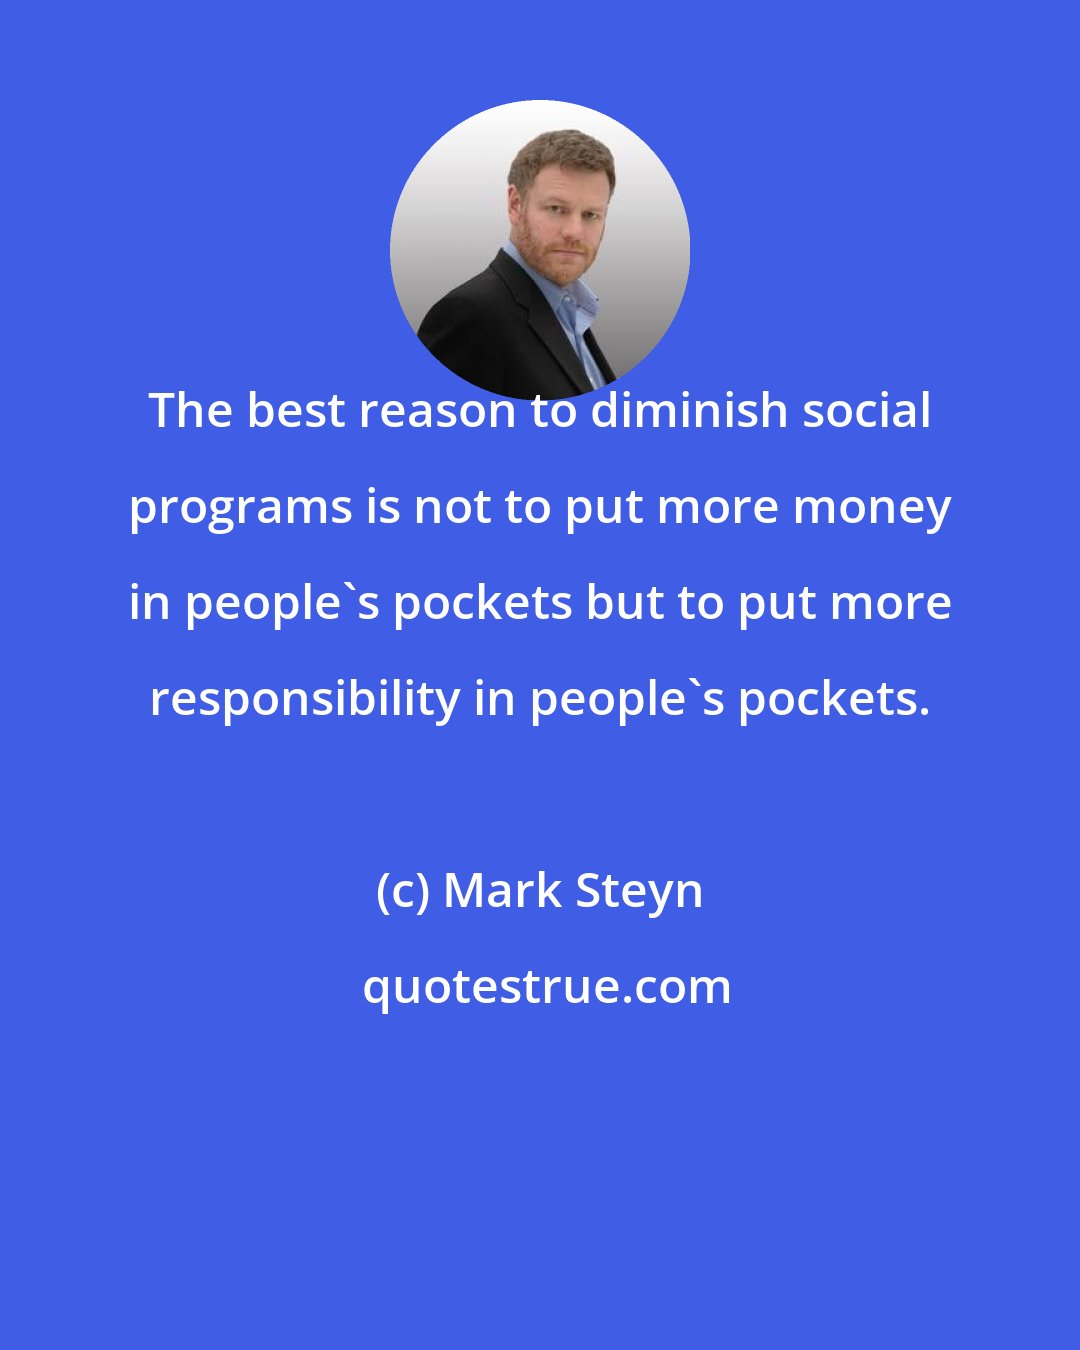 Mark Steyn: The best reason to diminish social programs is not to put more money in people's pockets but to put more responsibility in people's pockets.